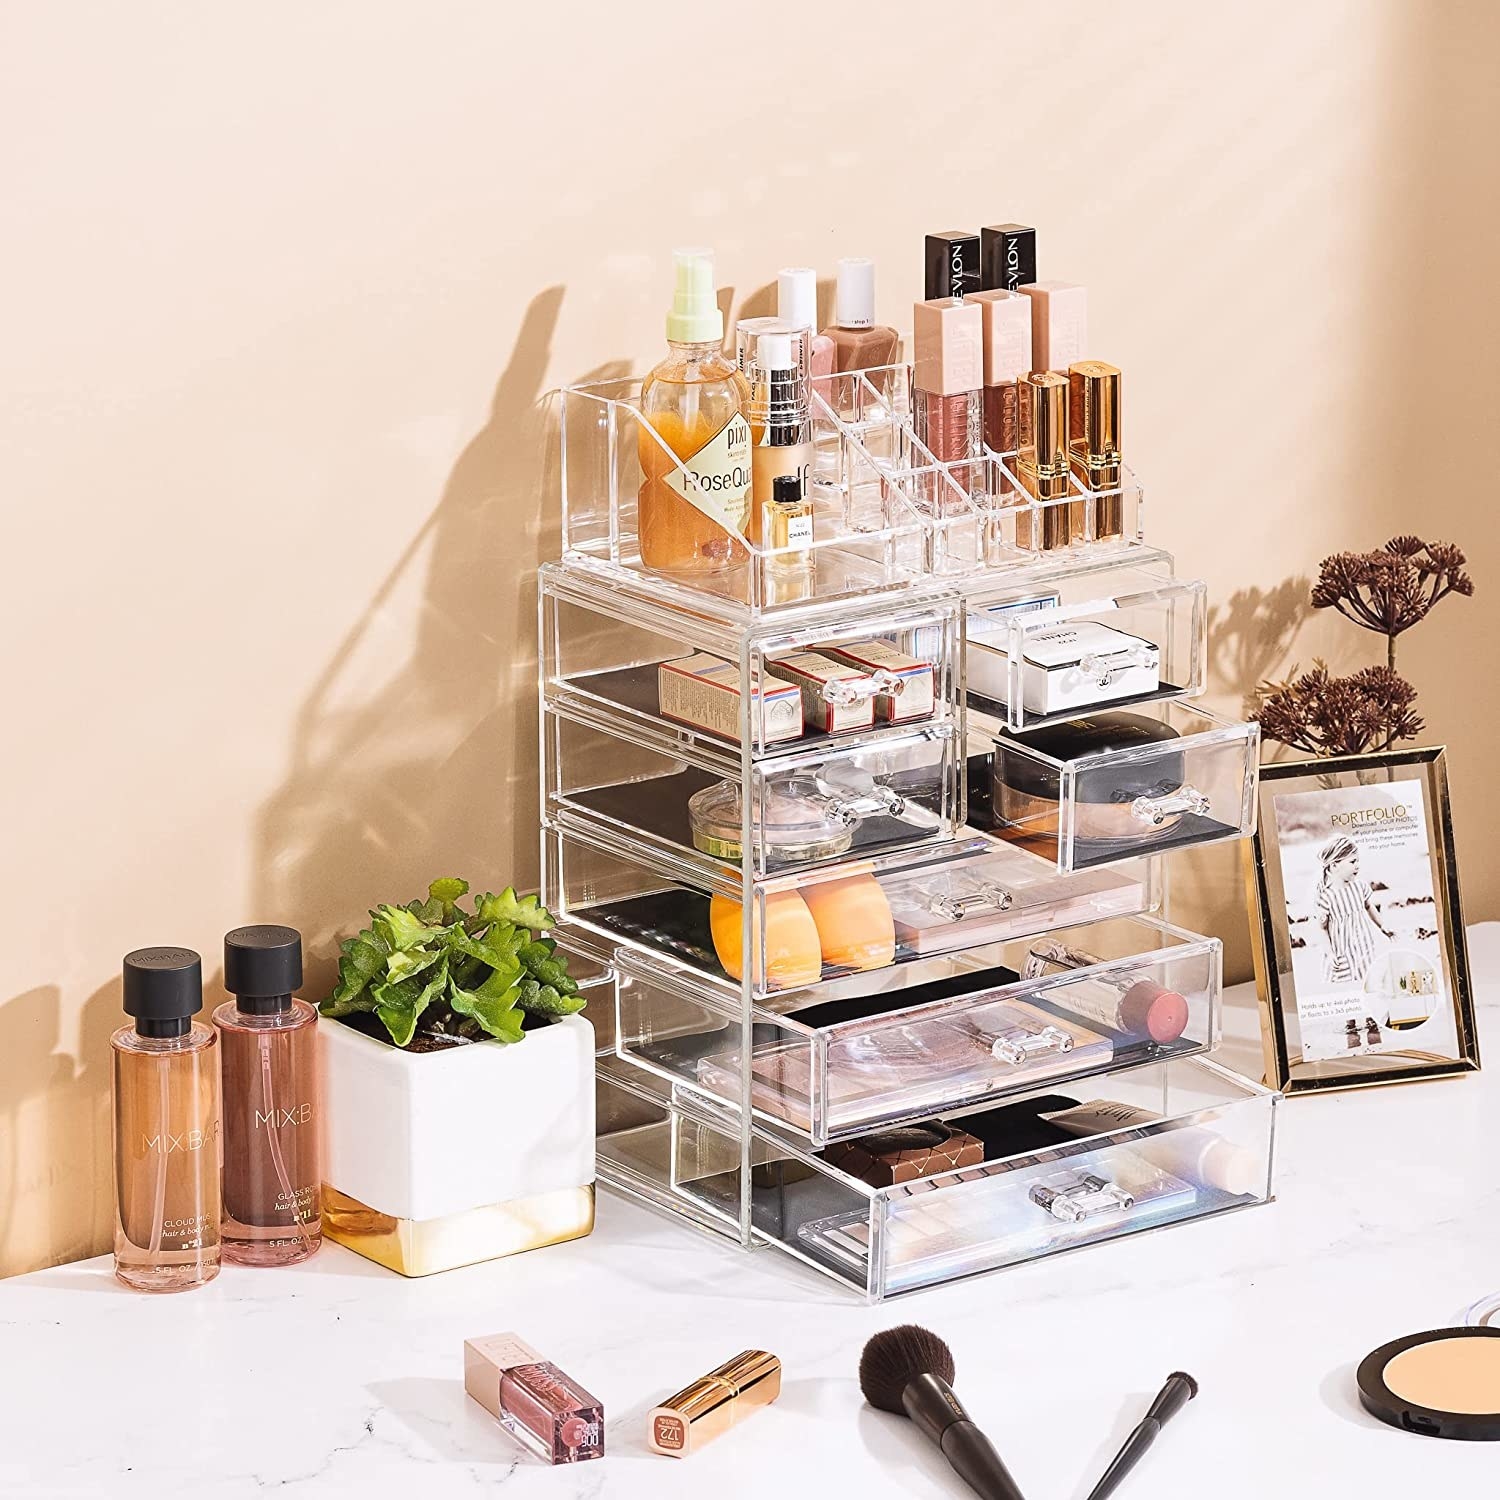 The organizer on a counter holding lipsticks, brushes, lashes, and other makeup in three large drawers, four small drawers,  and extra standing organizers on top